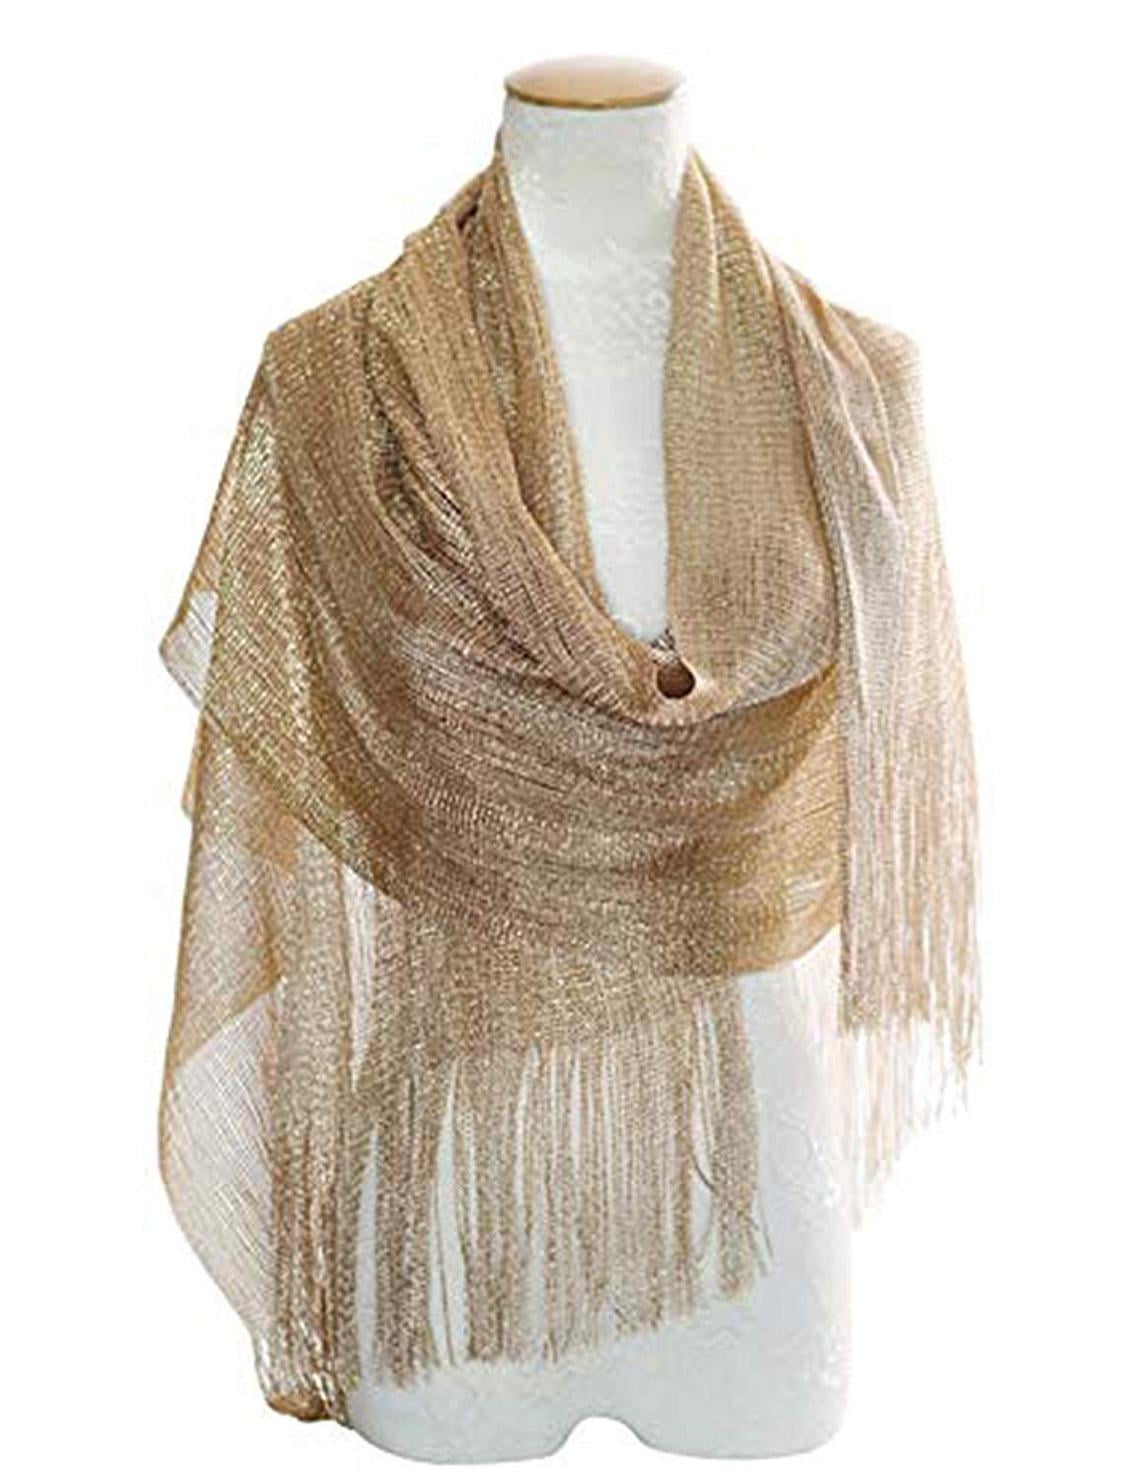 WEDDING SATIN SCARF SILVER SCARVES SPARKLY WRAPS COVER UP STOLES IVORY GOLD TOPS 